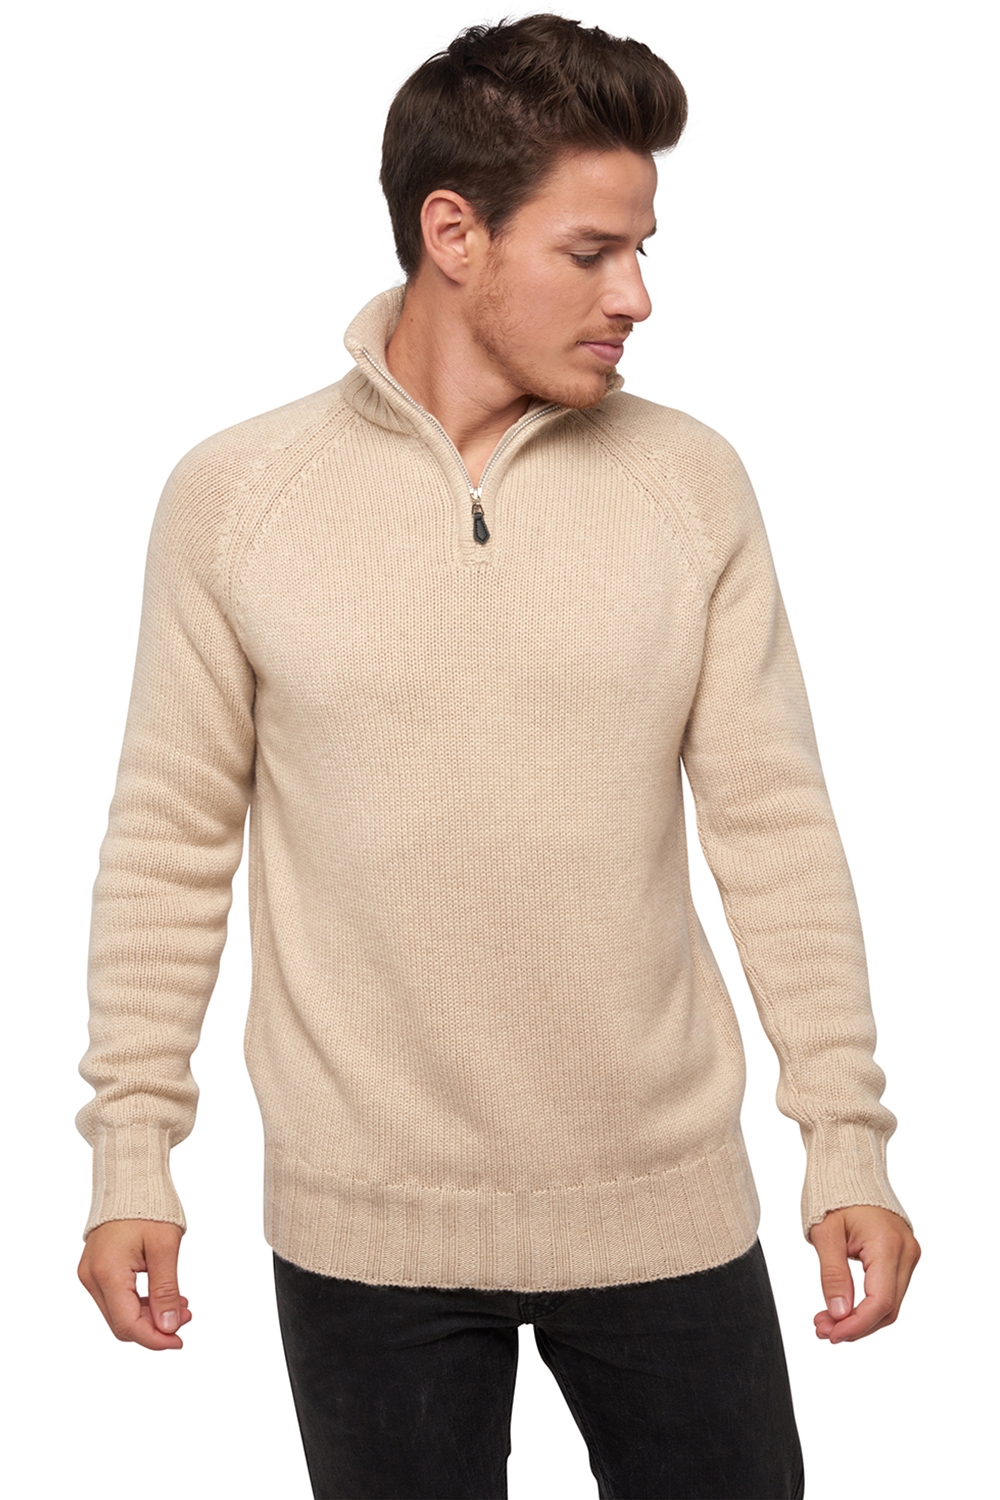  men chunky sweater natural viero natural beige 4xl